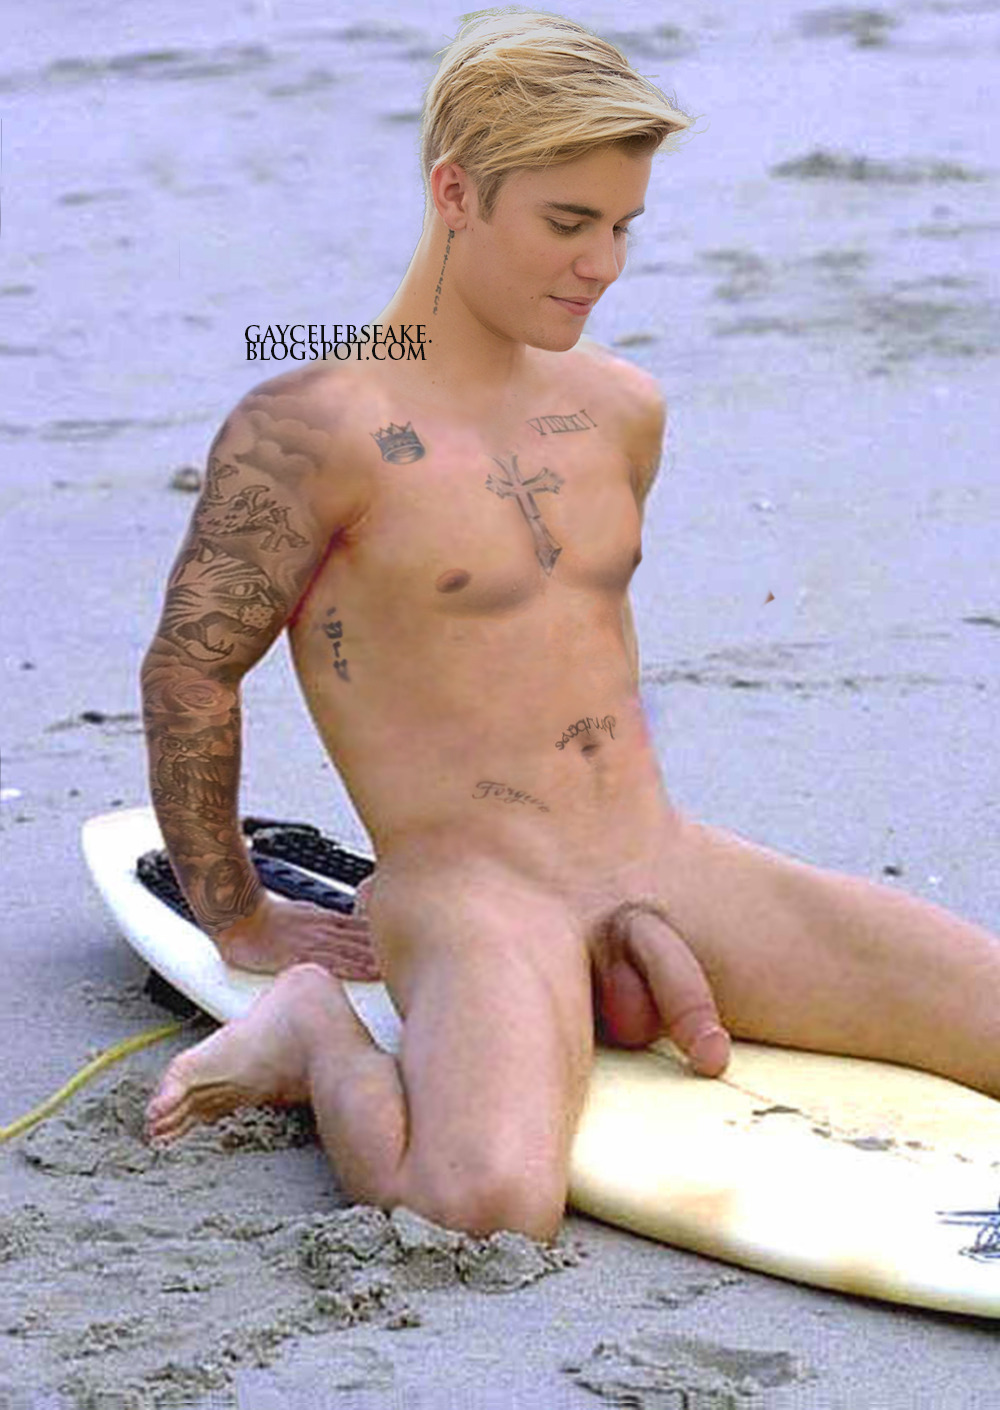 Pictures of justin bieber nude